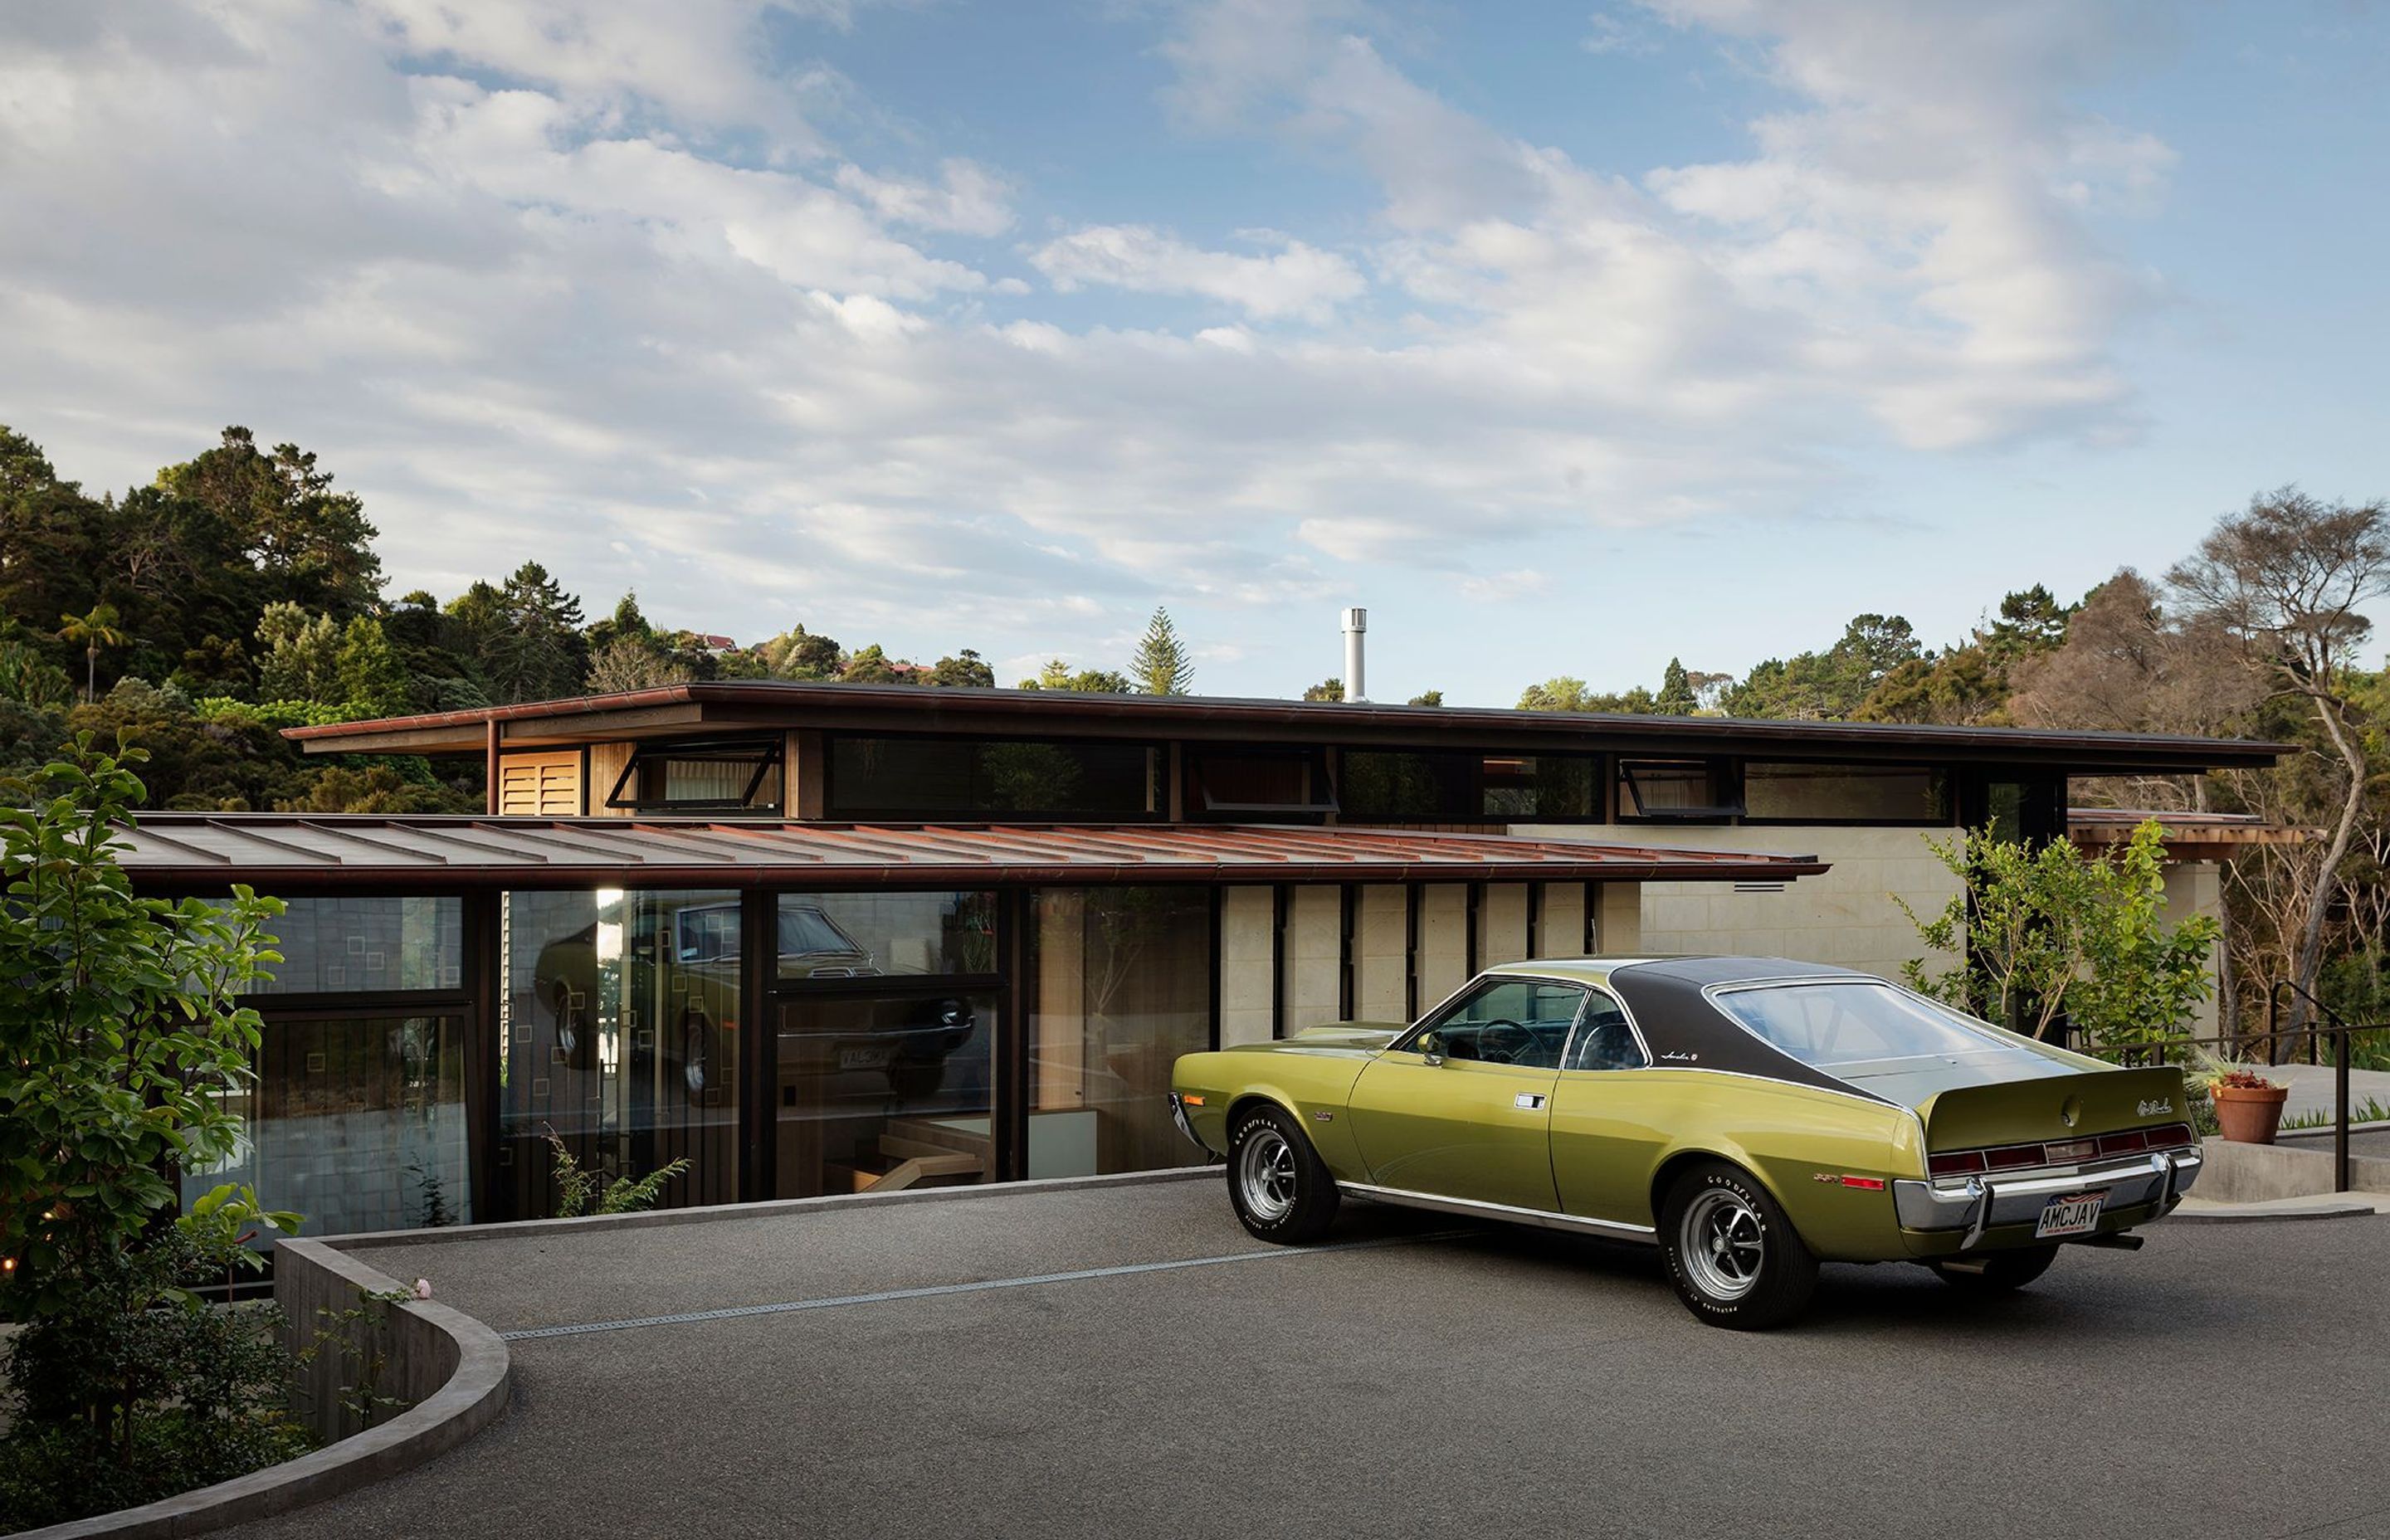 The driveway to the upper level of the house. The owner's prize 'muscle car', a 1970 AMC Javelin (Mark Donohue edition SST model), takes pride of place in the driveway.